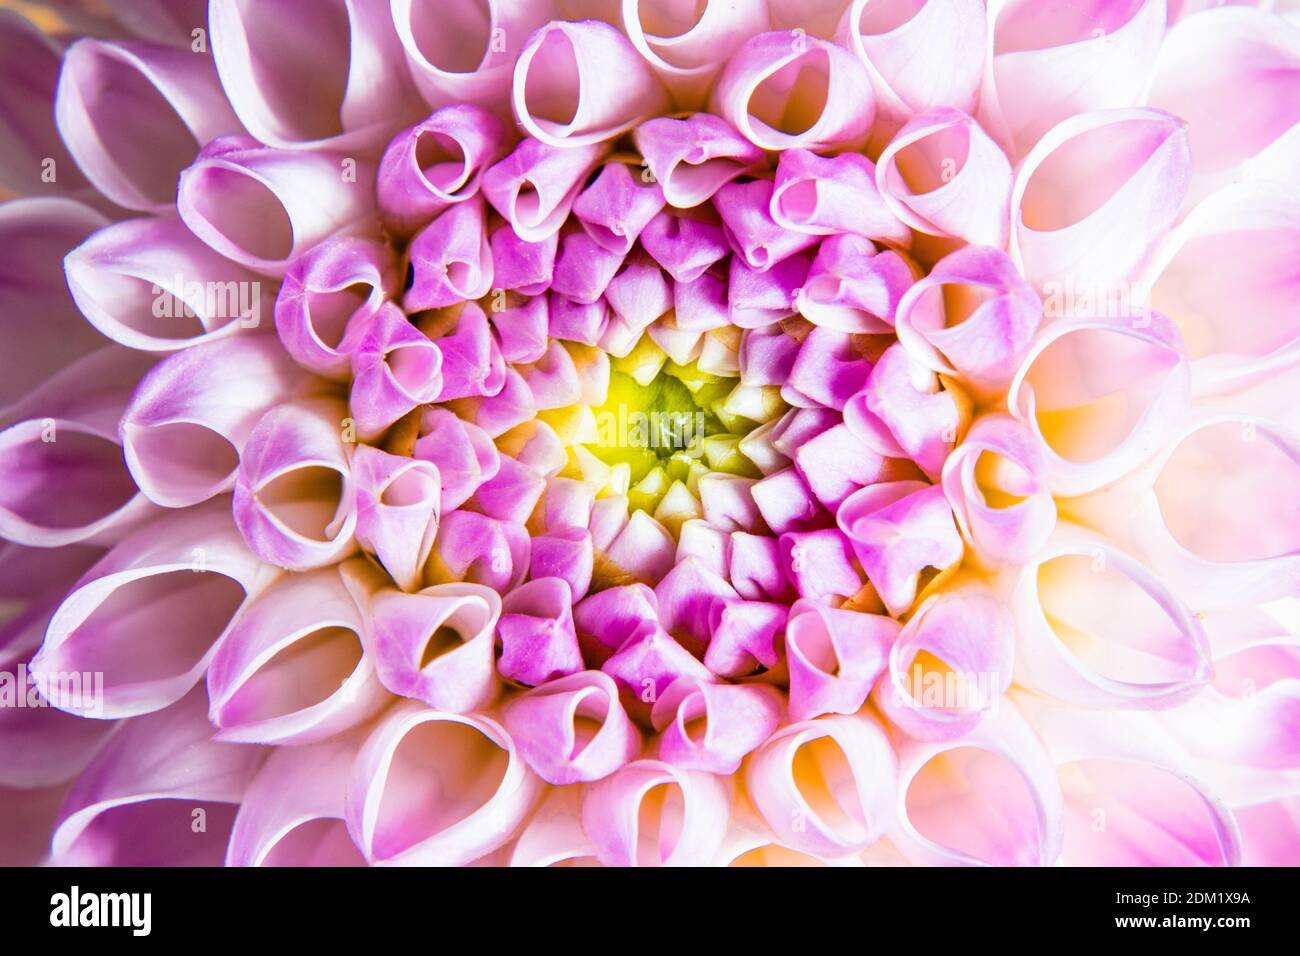 Top view of bud dahlia with pink petals different shades Stock Photo